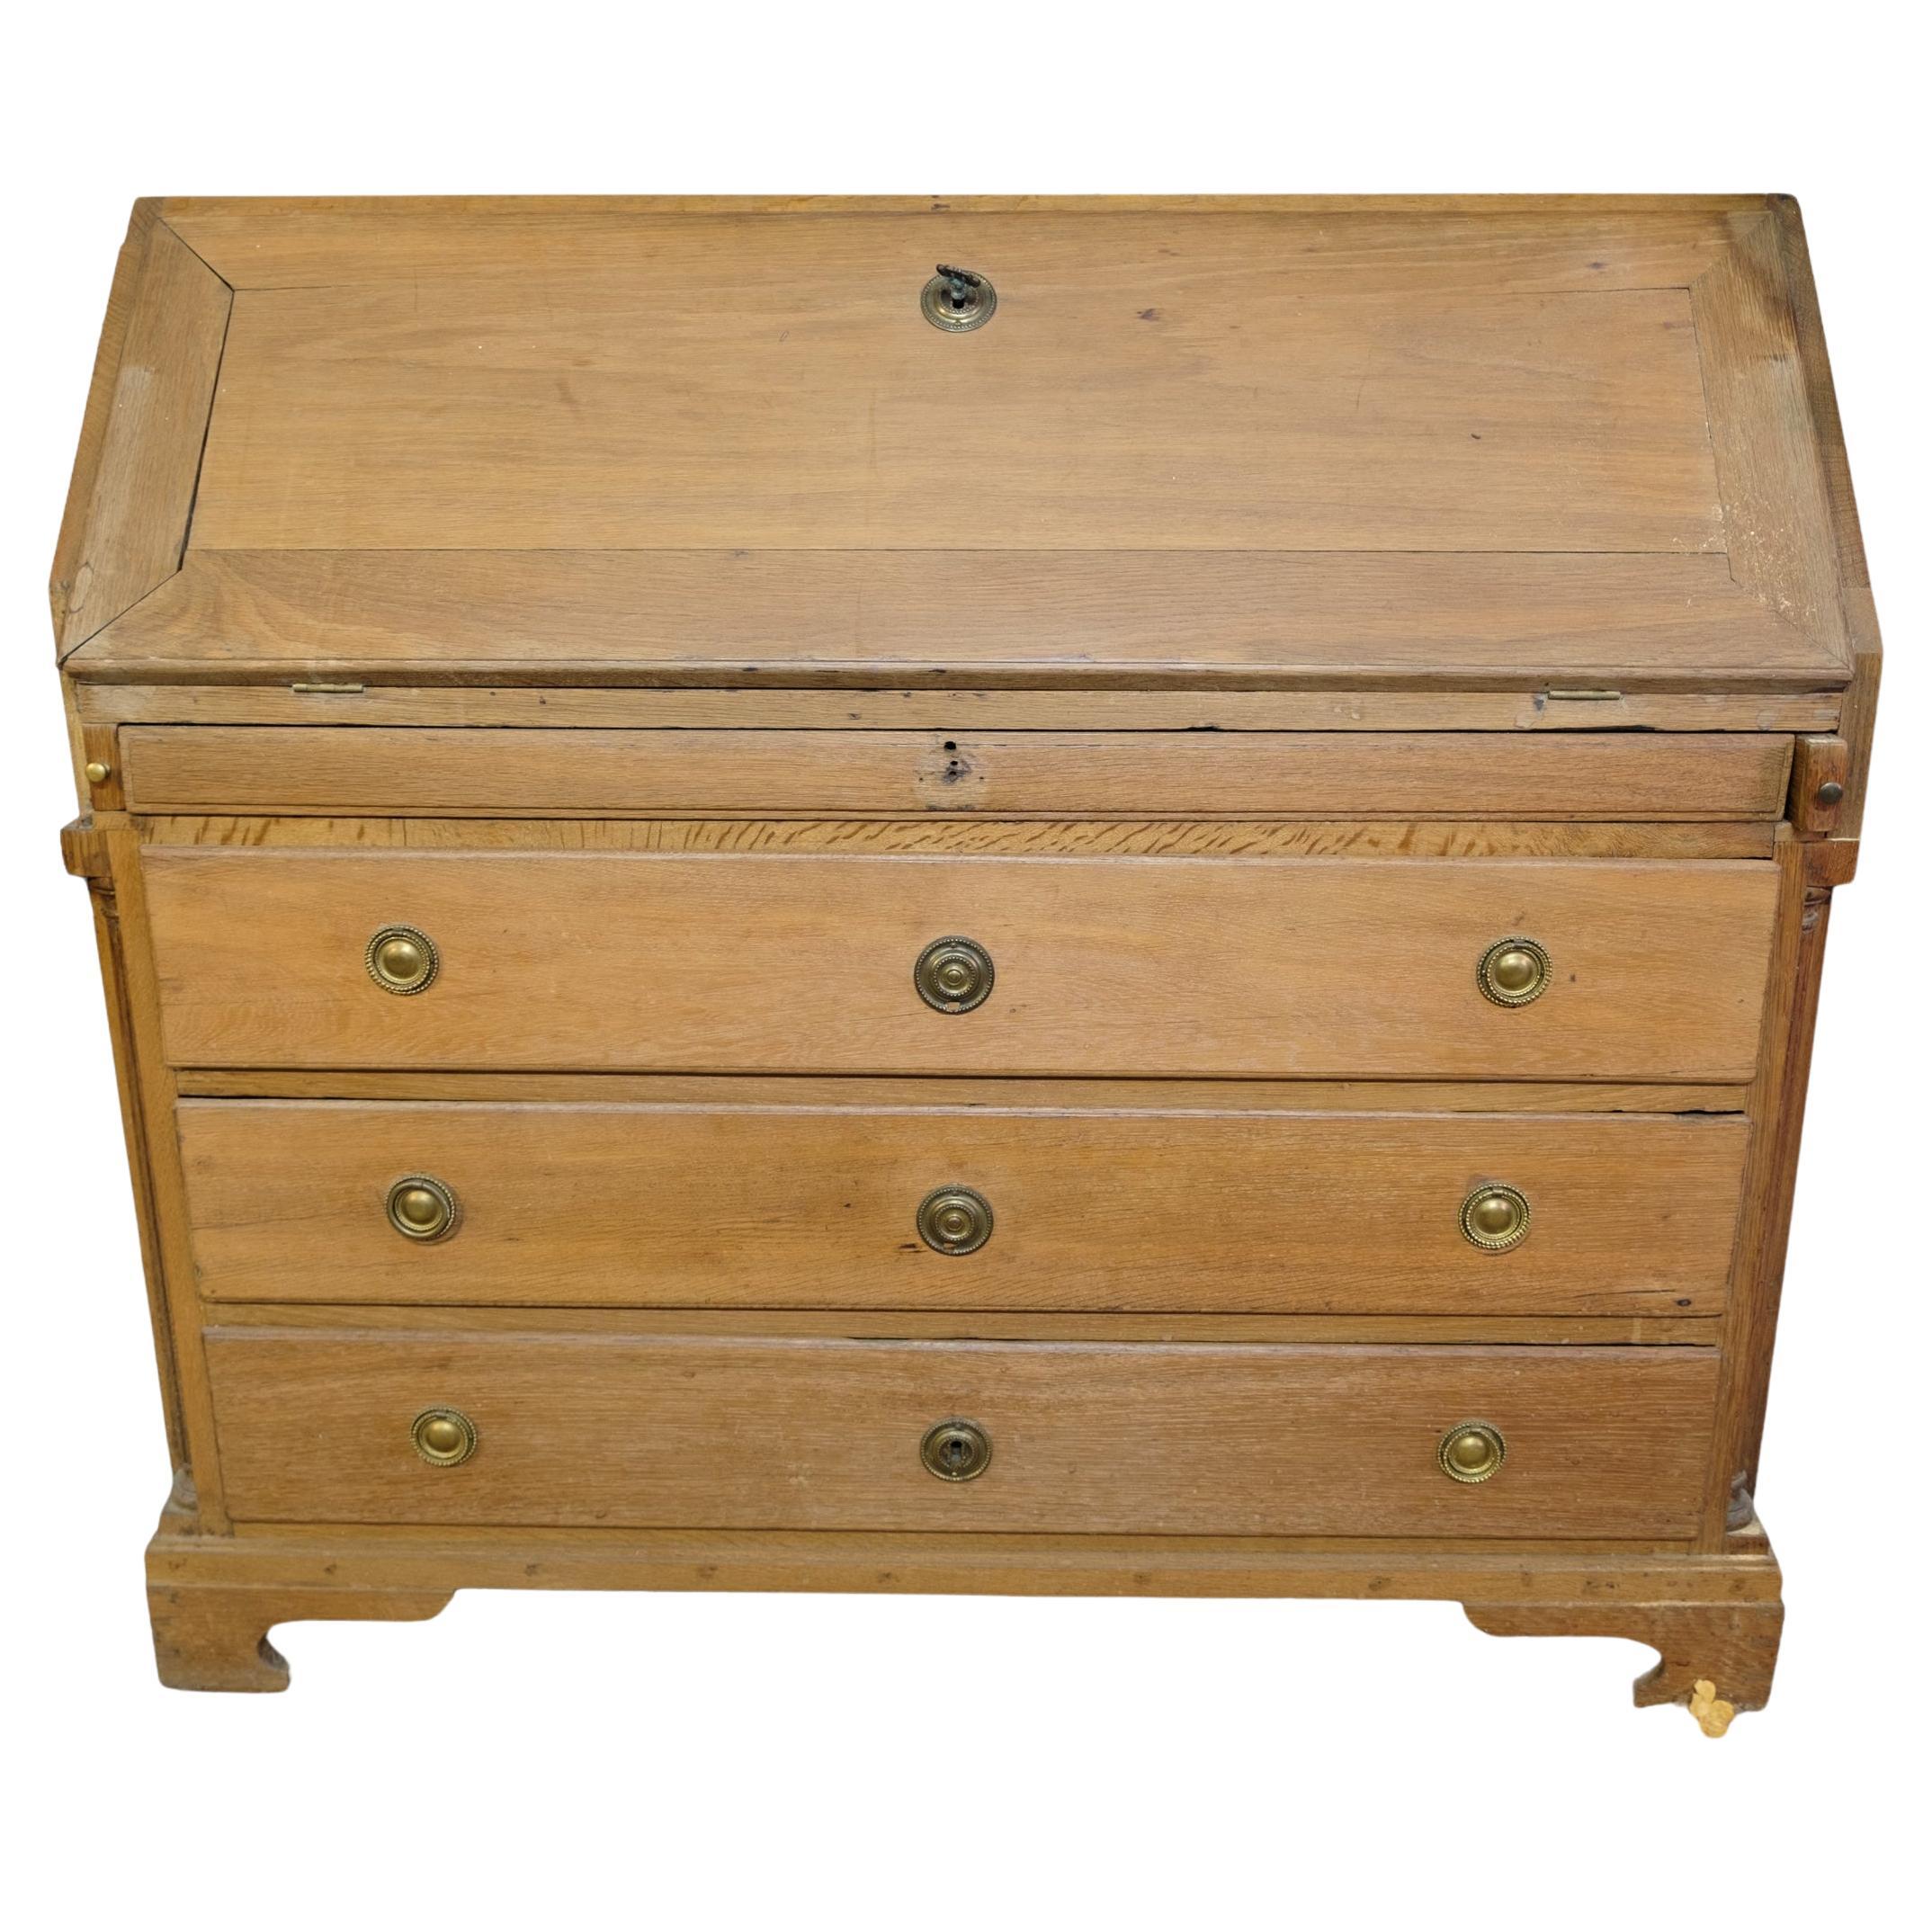 Louis Seize style chatol made in oak from around 1780s For Sale